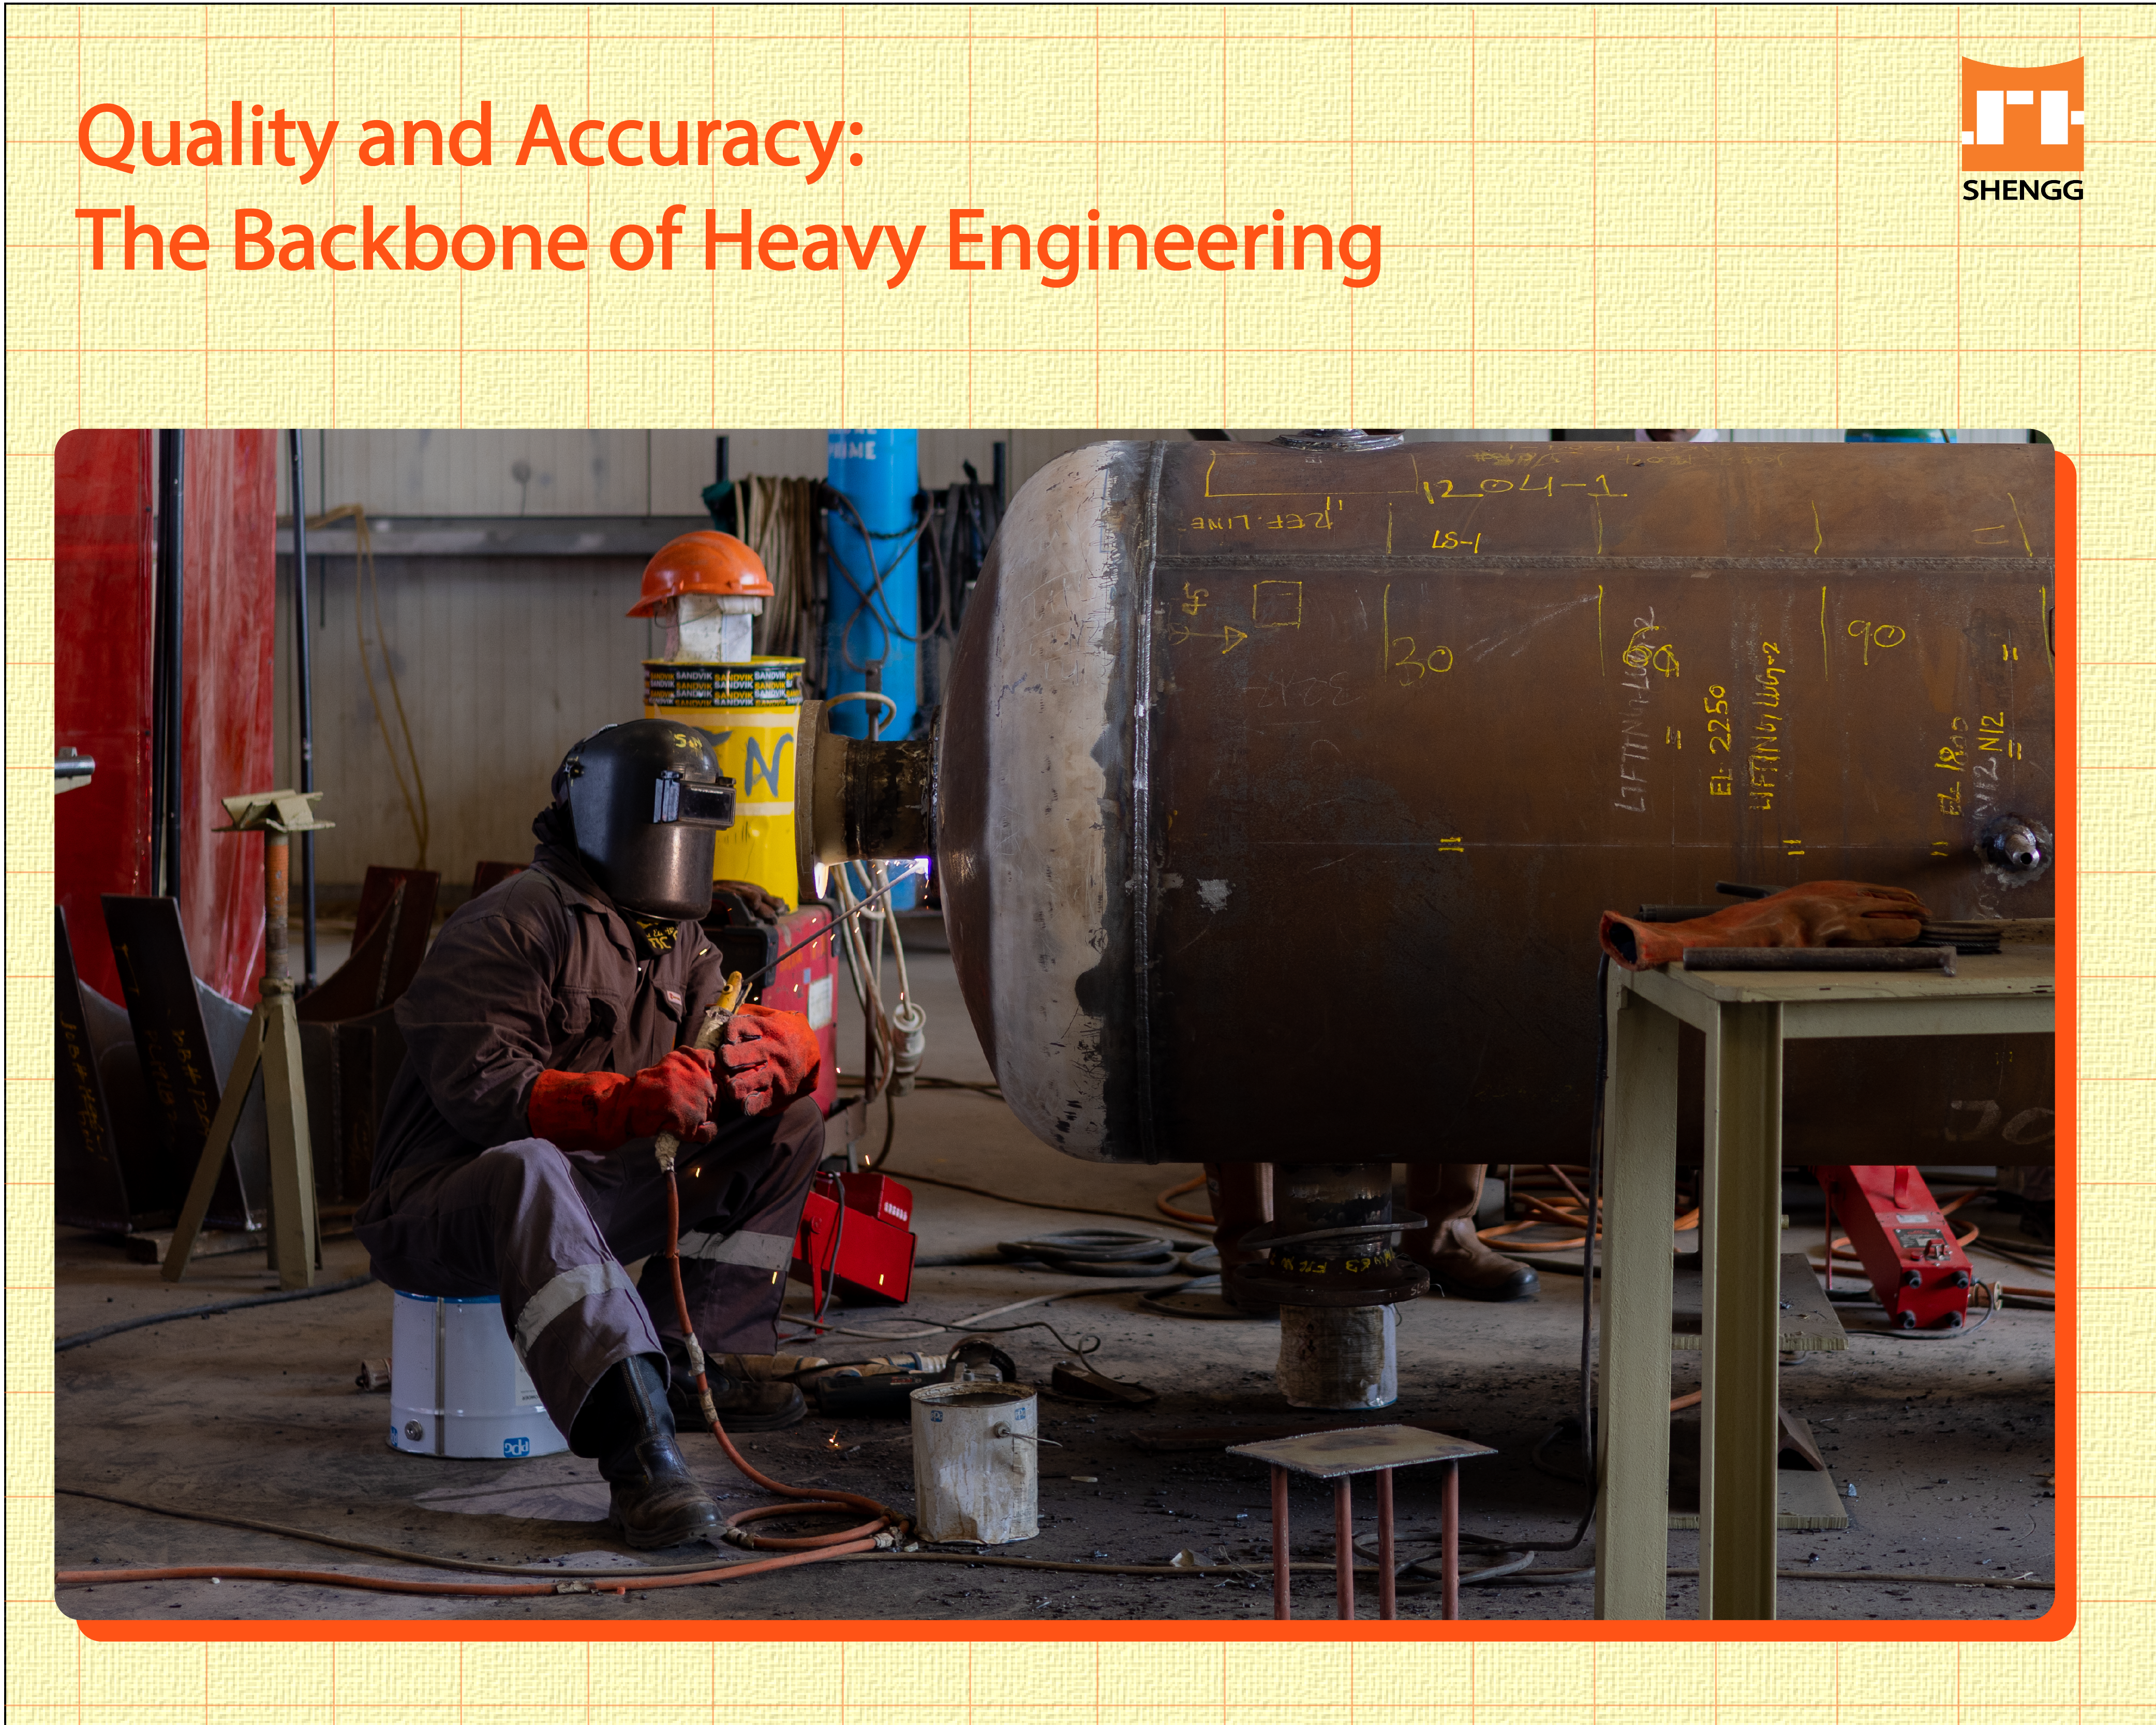 Quality and Accuracy – The Backbone of Heavy Engineering